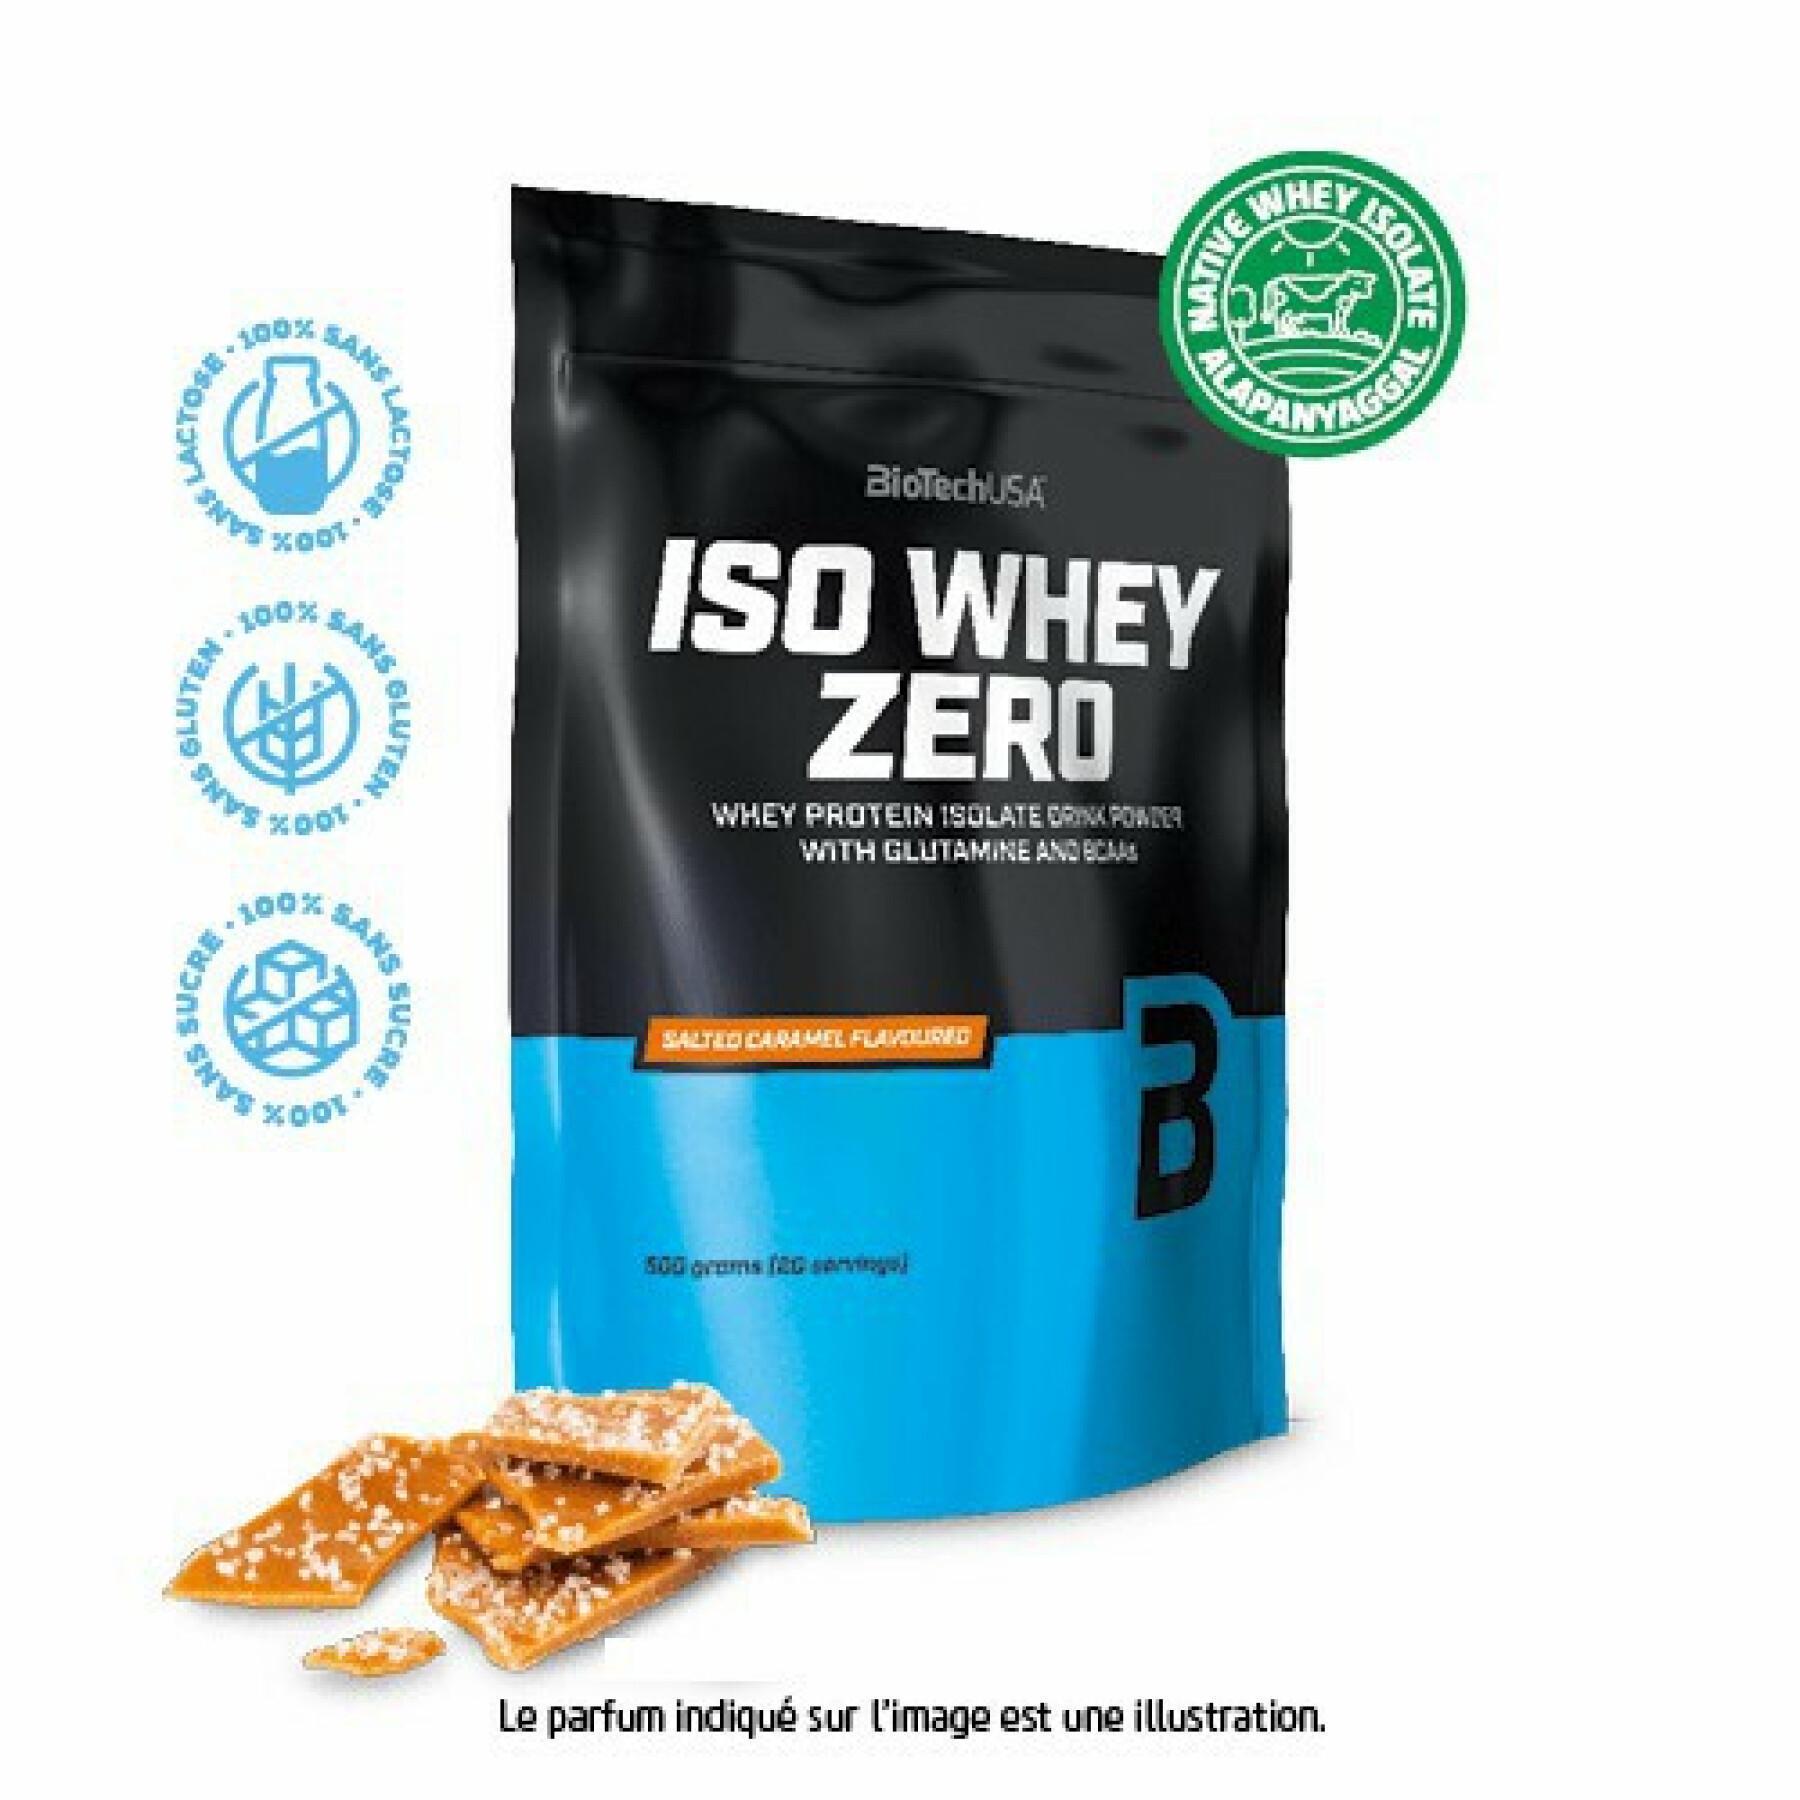 Pack of 10 bags of protein Biotech USA iso whey zero lactose free - Caramel salé - 500g